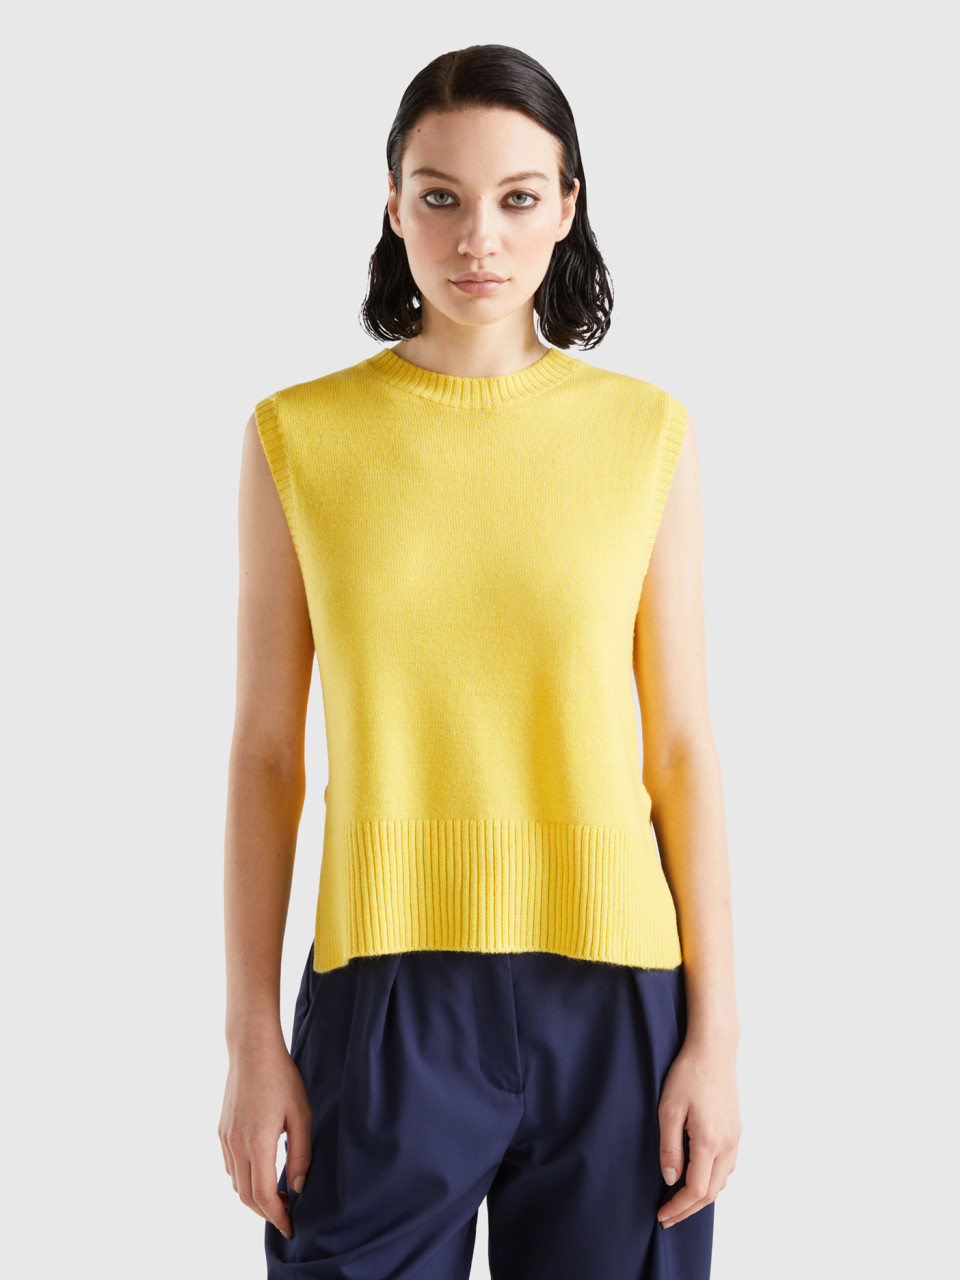 Benetton, Knit Vest With Slits, Yellow, Women